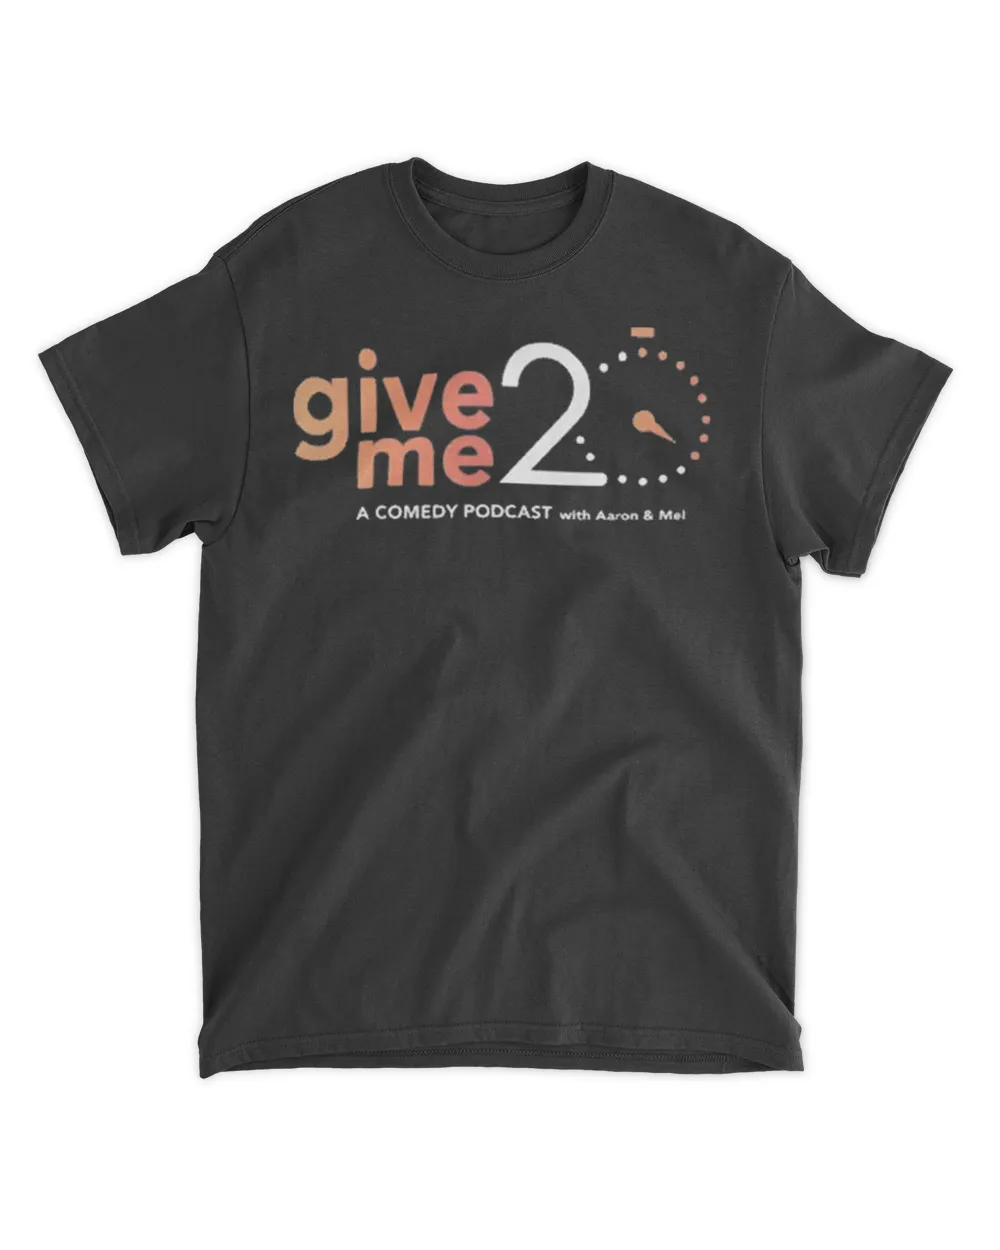 Give 20 me a comedy podcast with aaron and mel by matt burn out brighter shirt